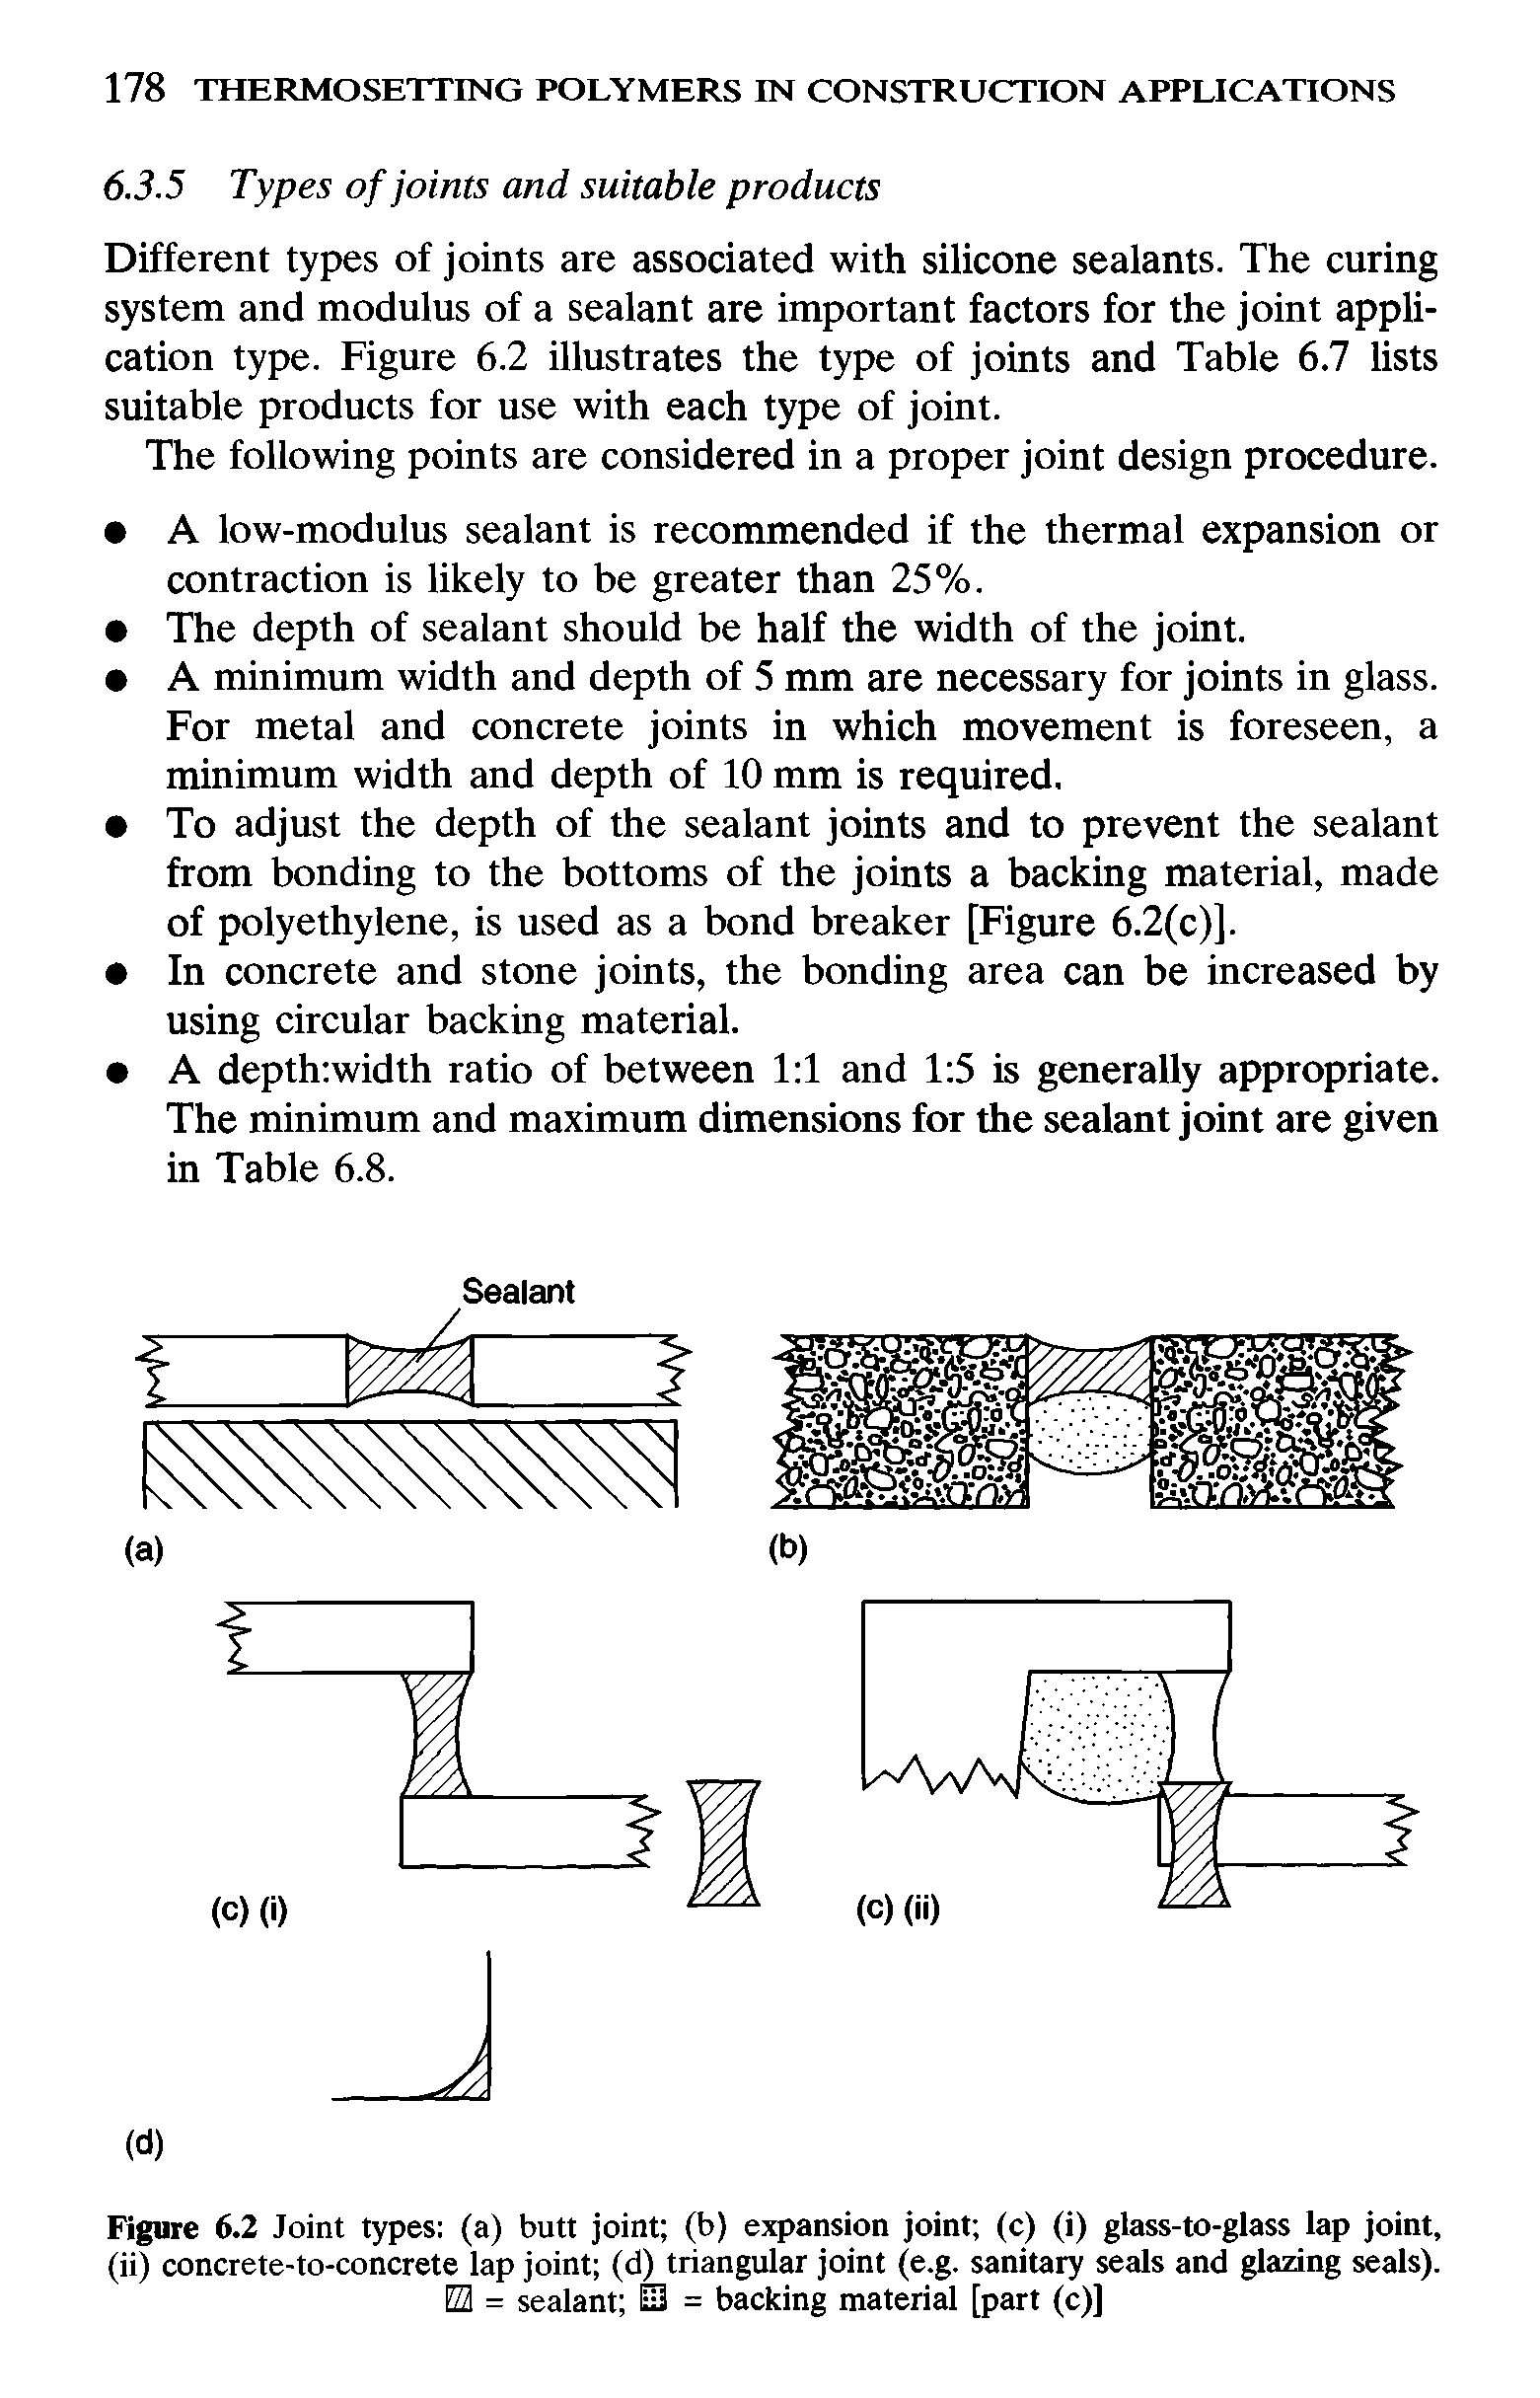 Figure 6.2 Joint types (a) butt joint (b) expansion joint (c) (i) glass-to-glass lap joint, (ii) concrete-to-concrete lap joint (d) triangular joint (e.g. sanitary seals and glazing seals). H = sealant S = backing material [part (c)]...